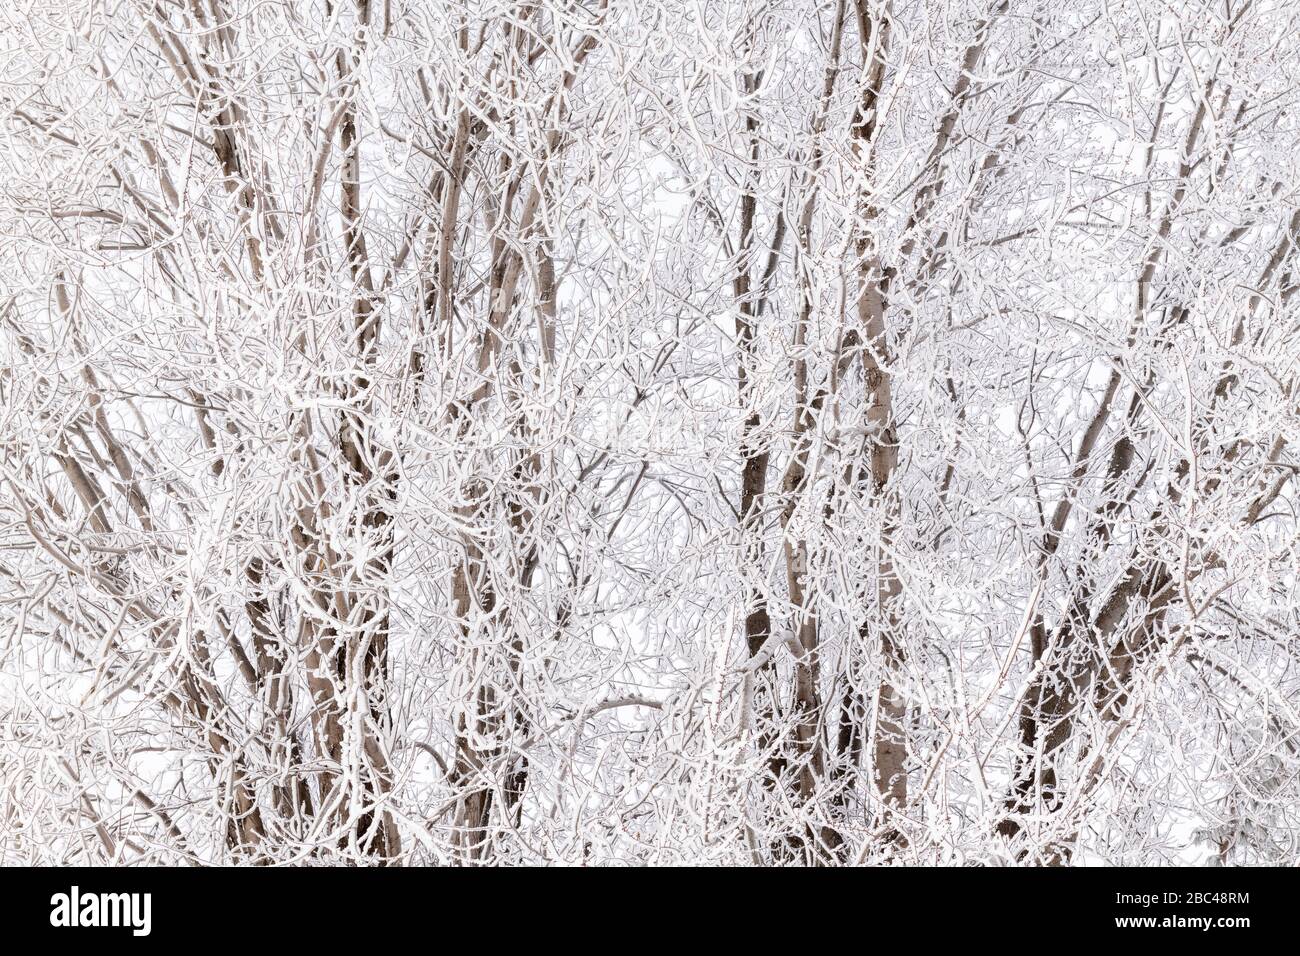 Hoarfrost (rime frost) covering prairie grasses and trees, Winter, midwestern USA, by Dominique Braud/Dembinsky Photo Assoc Stock Photo